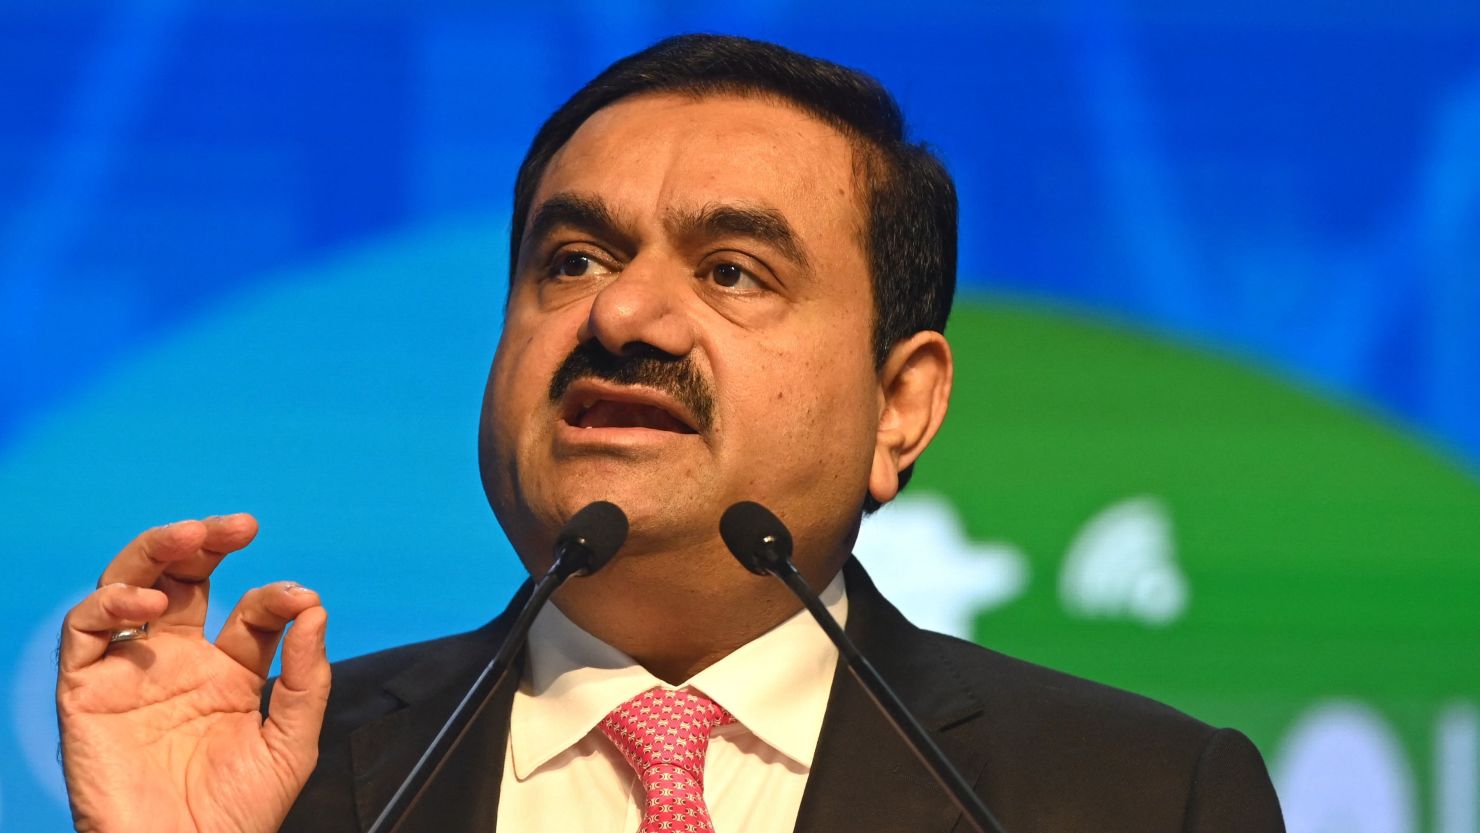 Chairperson of Indian conglomerate Adani Group, Gautam Adani, speaks at the World Congress of Accountants in Mumbai on November 19, 2022. (Photo by INDRANIL MUKHERJEE / AFP) (Photo by INDRANIL MUKHERJEE/AFP via Getty Images)